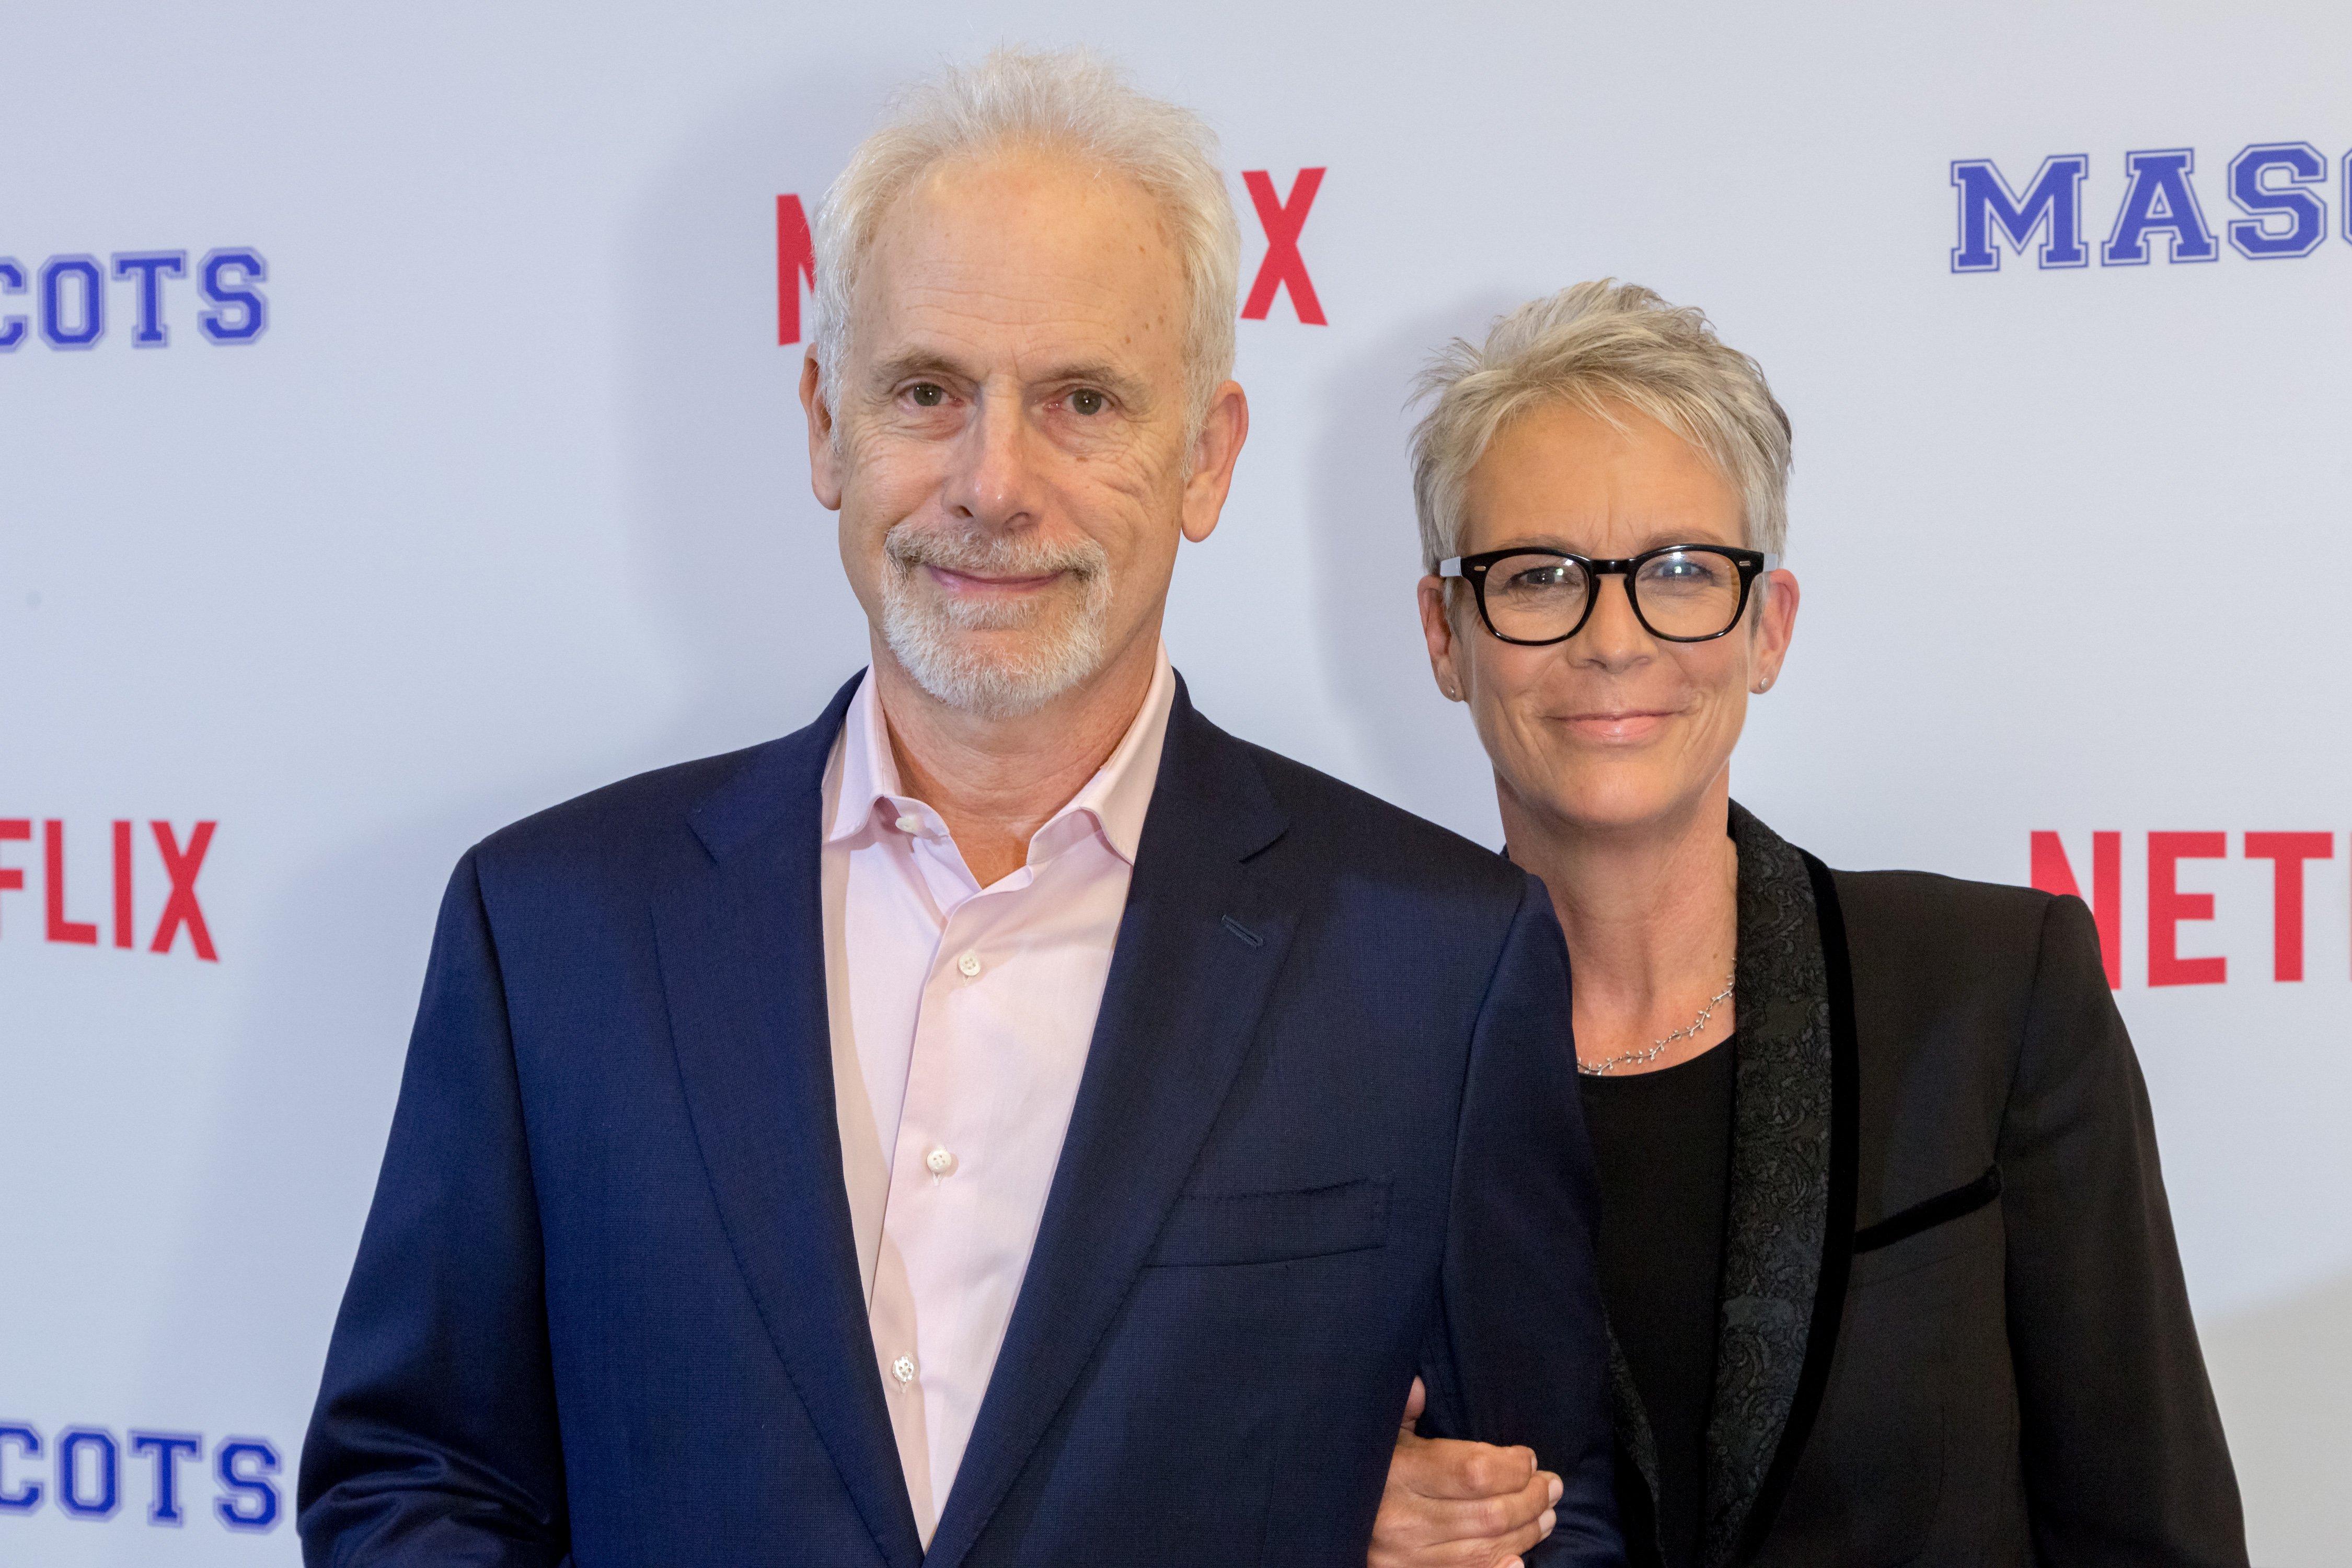 Christopher Guest and actress Jamie Lee Curtis arrive at a Screening Of Netflix's "Mascots" at the Linwood Dunn Theater on October 5, 2016 in Los Angeles, California | Photo: GettyImages